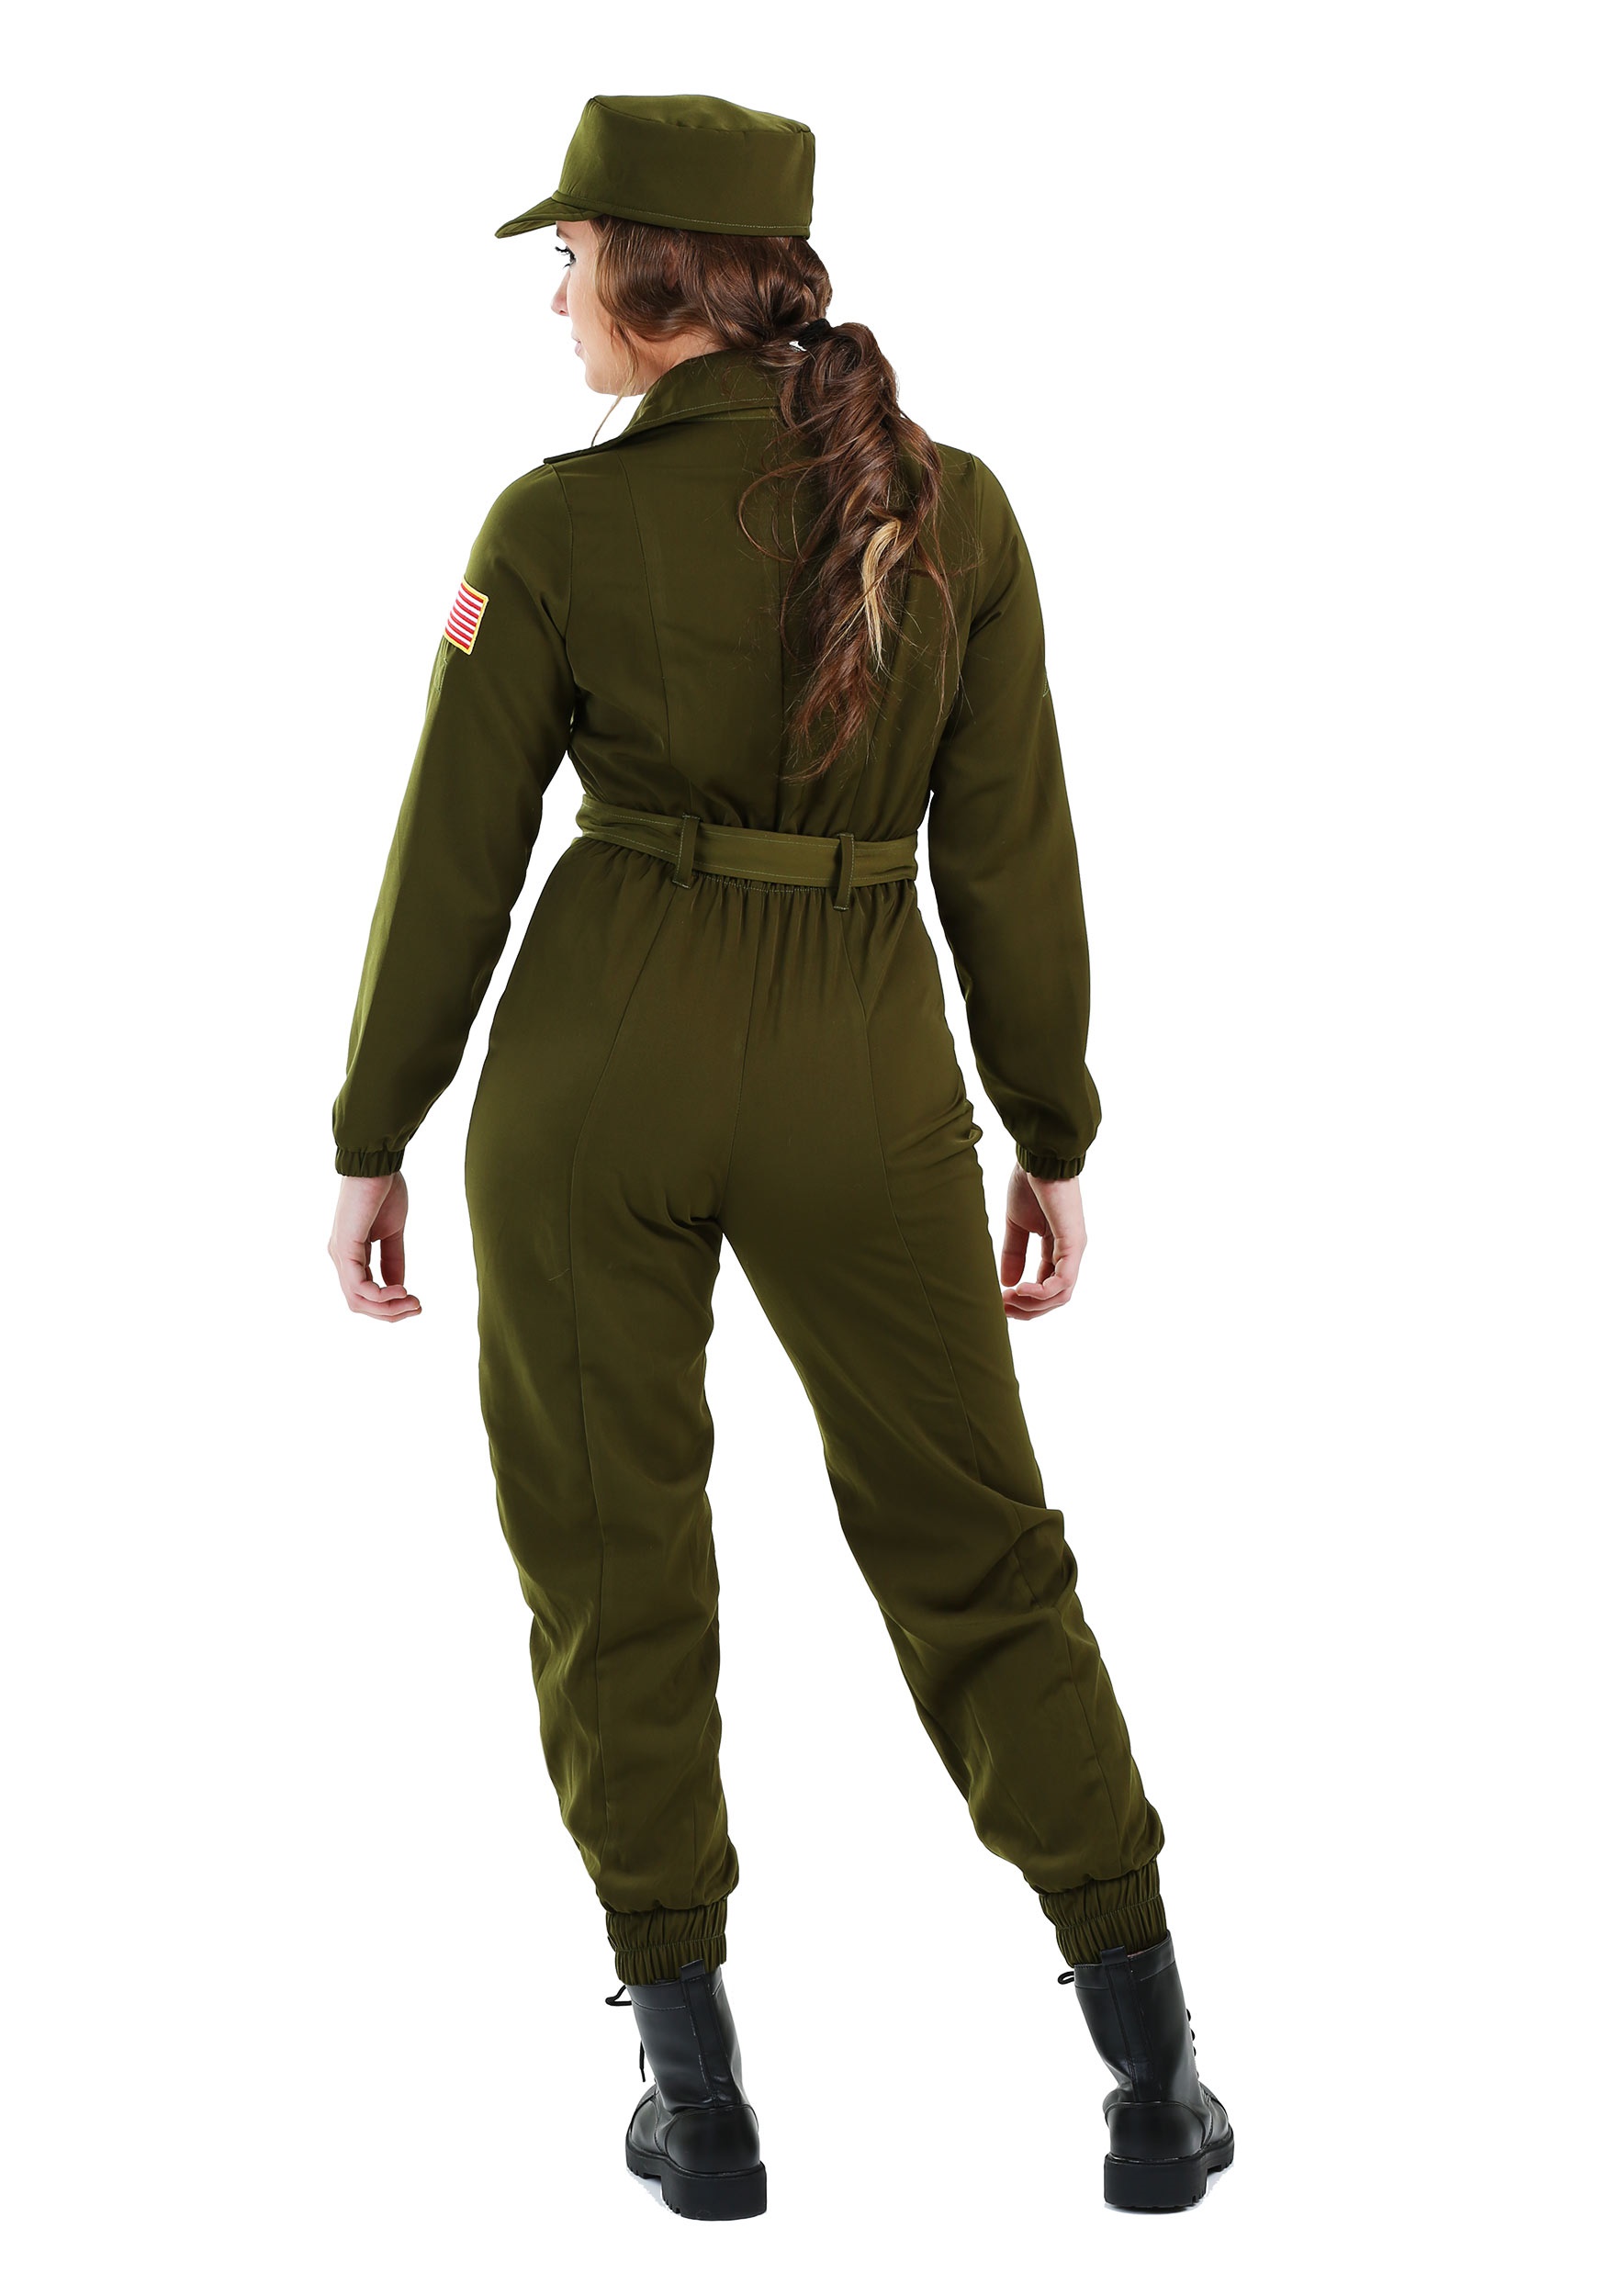 https://images.halloweencostumes.ca/products/38457/2-1-78595/womens-army-flightsuit-costume.jpg